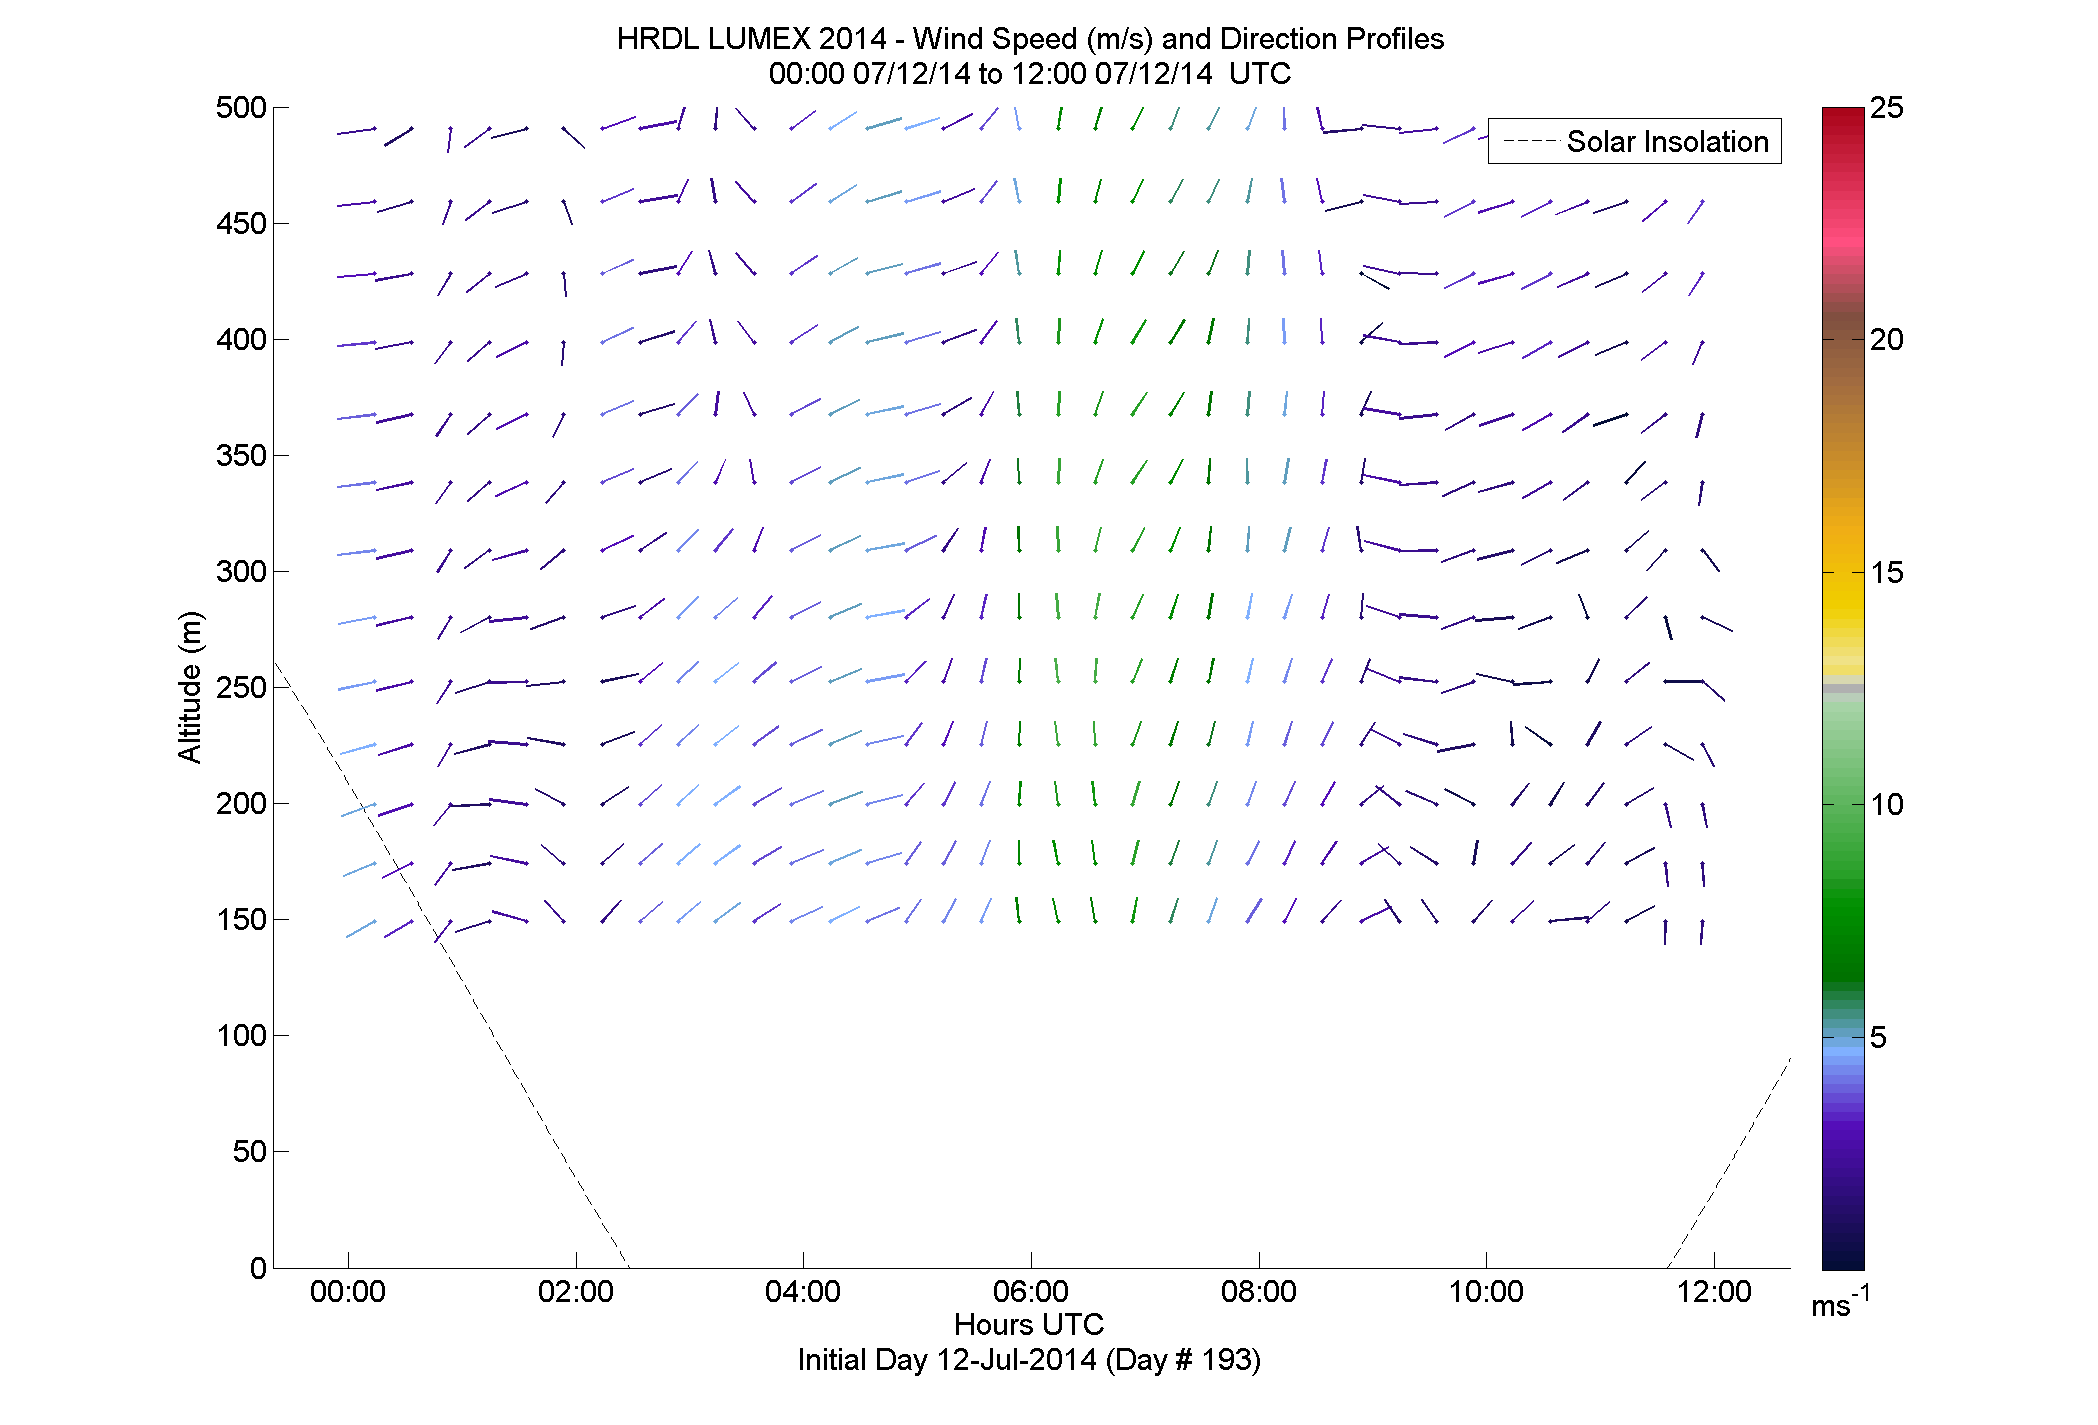 HRDL speed and direction profile - July 12 am